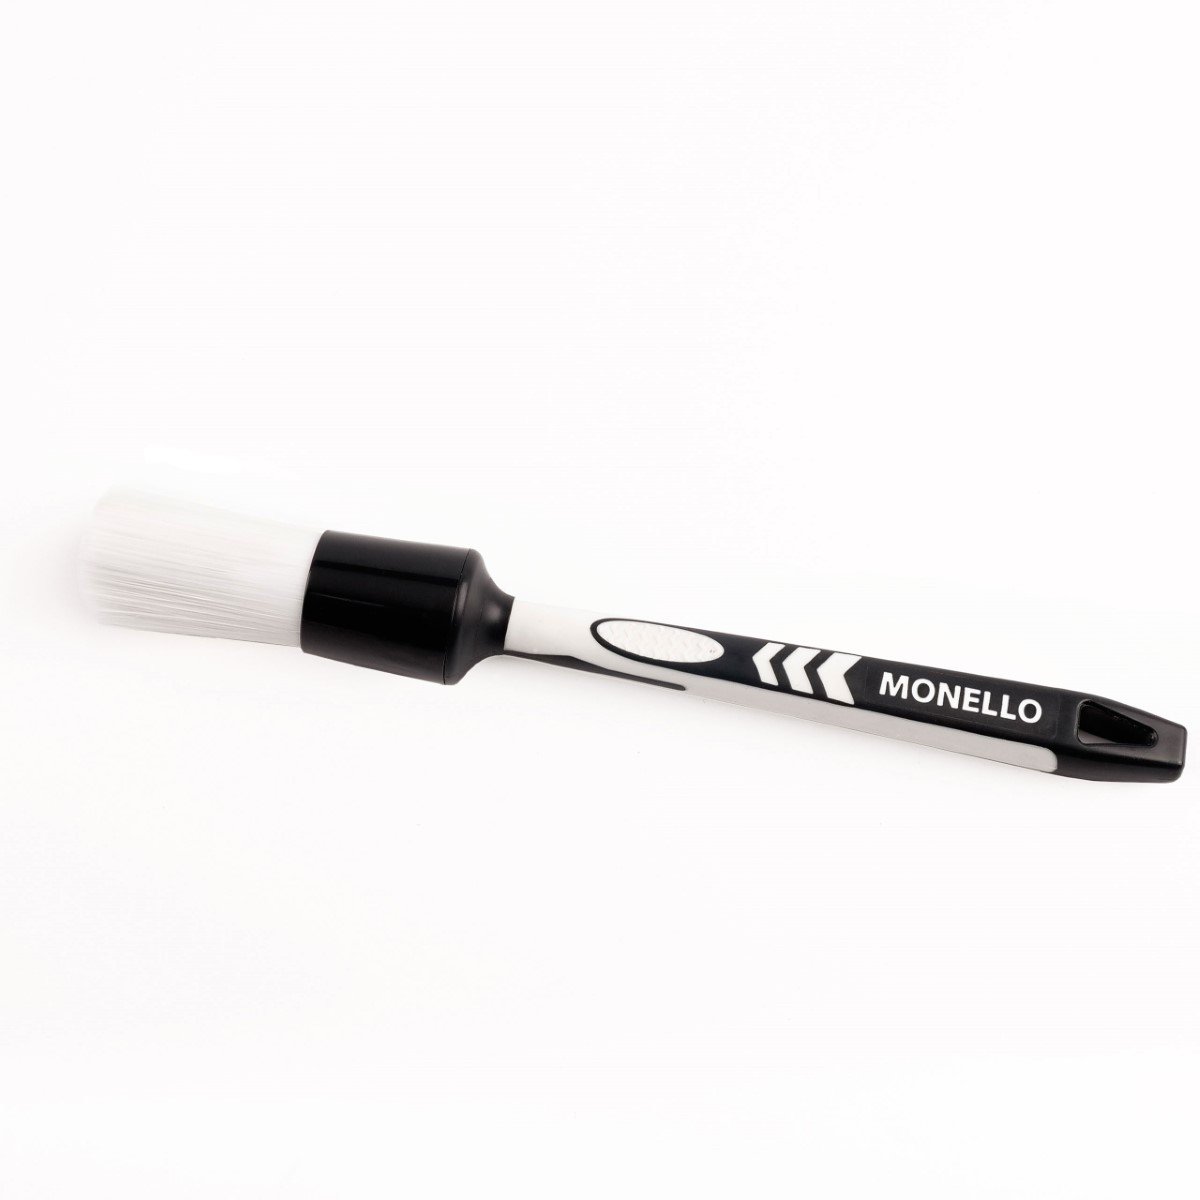 Pennello Bianco Soft Detailing Brush - 21mm